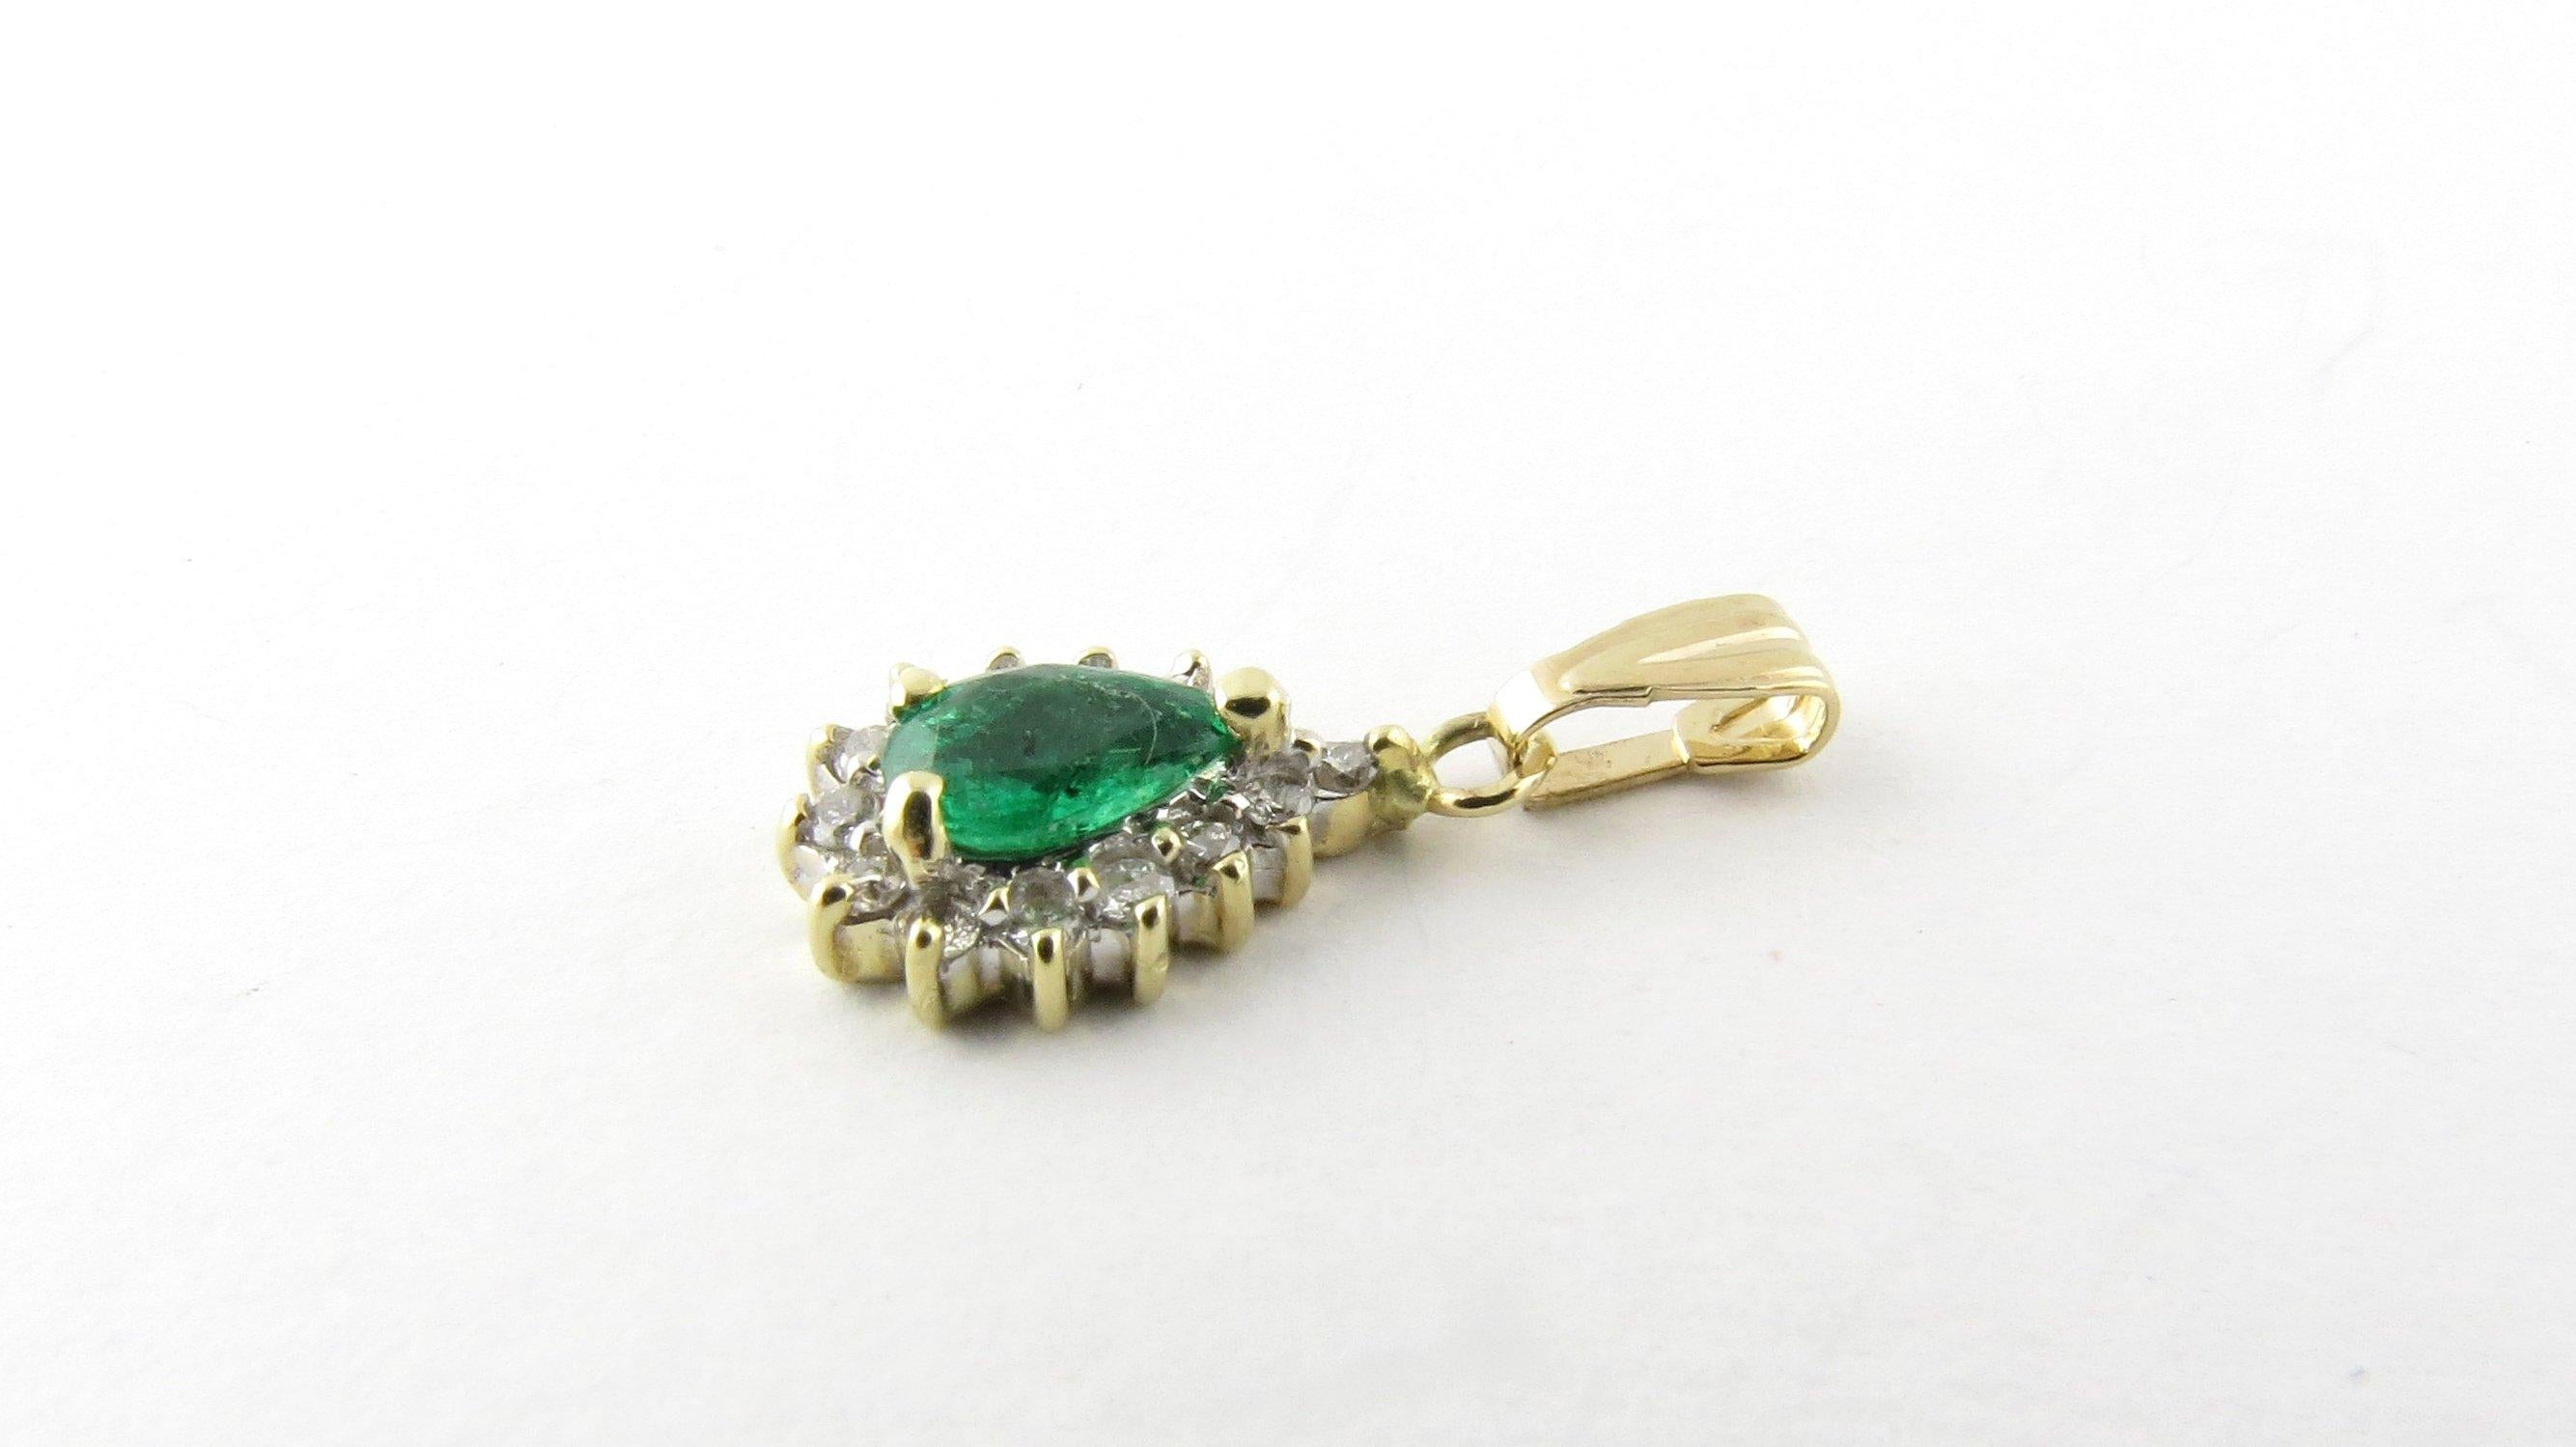 Vintage 14 Karat Yellow Gold Emerald and Diamond Pendant
This stunning pendant features one pear shaped emerald (7 mm x 4 mm) surrounded by 14 round brilliant cut diamonds set in 14K yellow gold. 
Approximate total diamond weight: .14 ct. 
Diamond